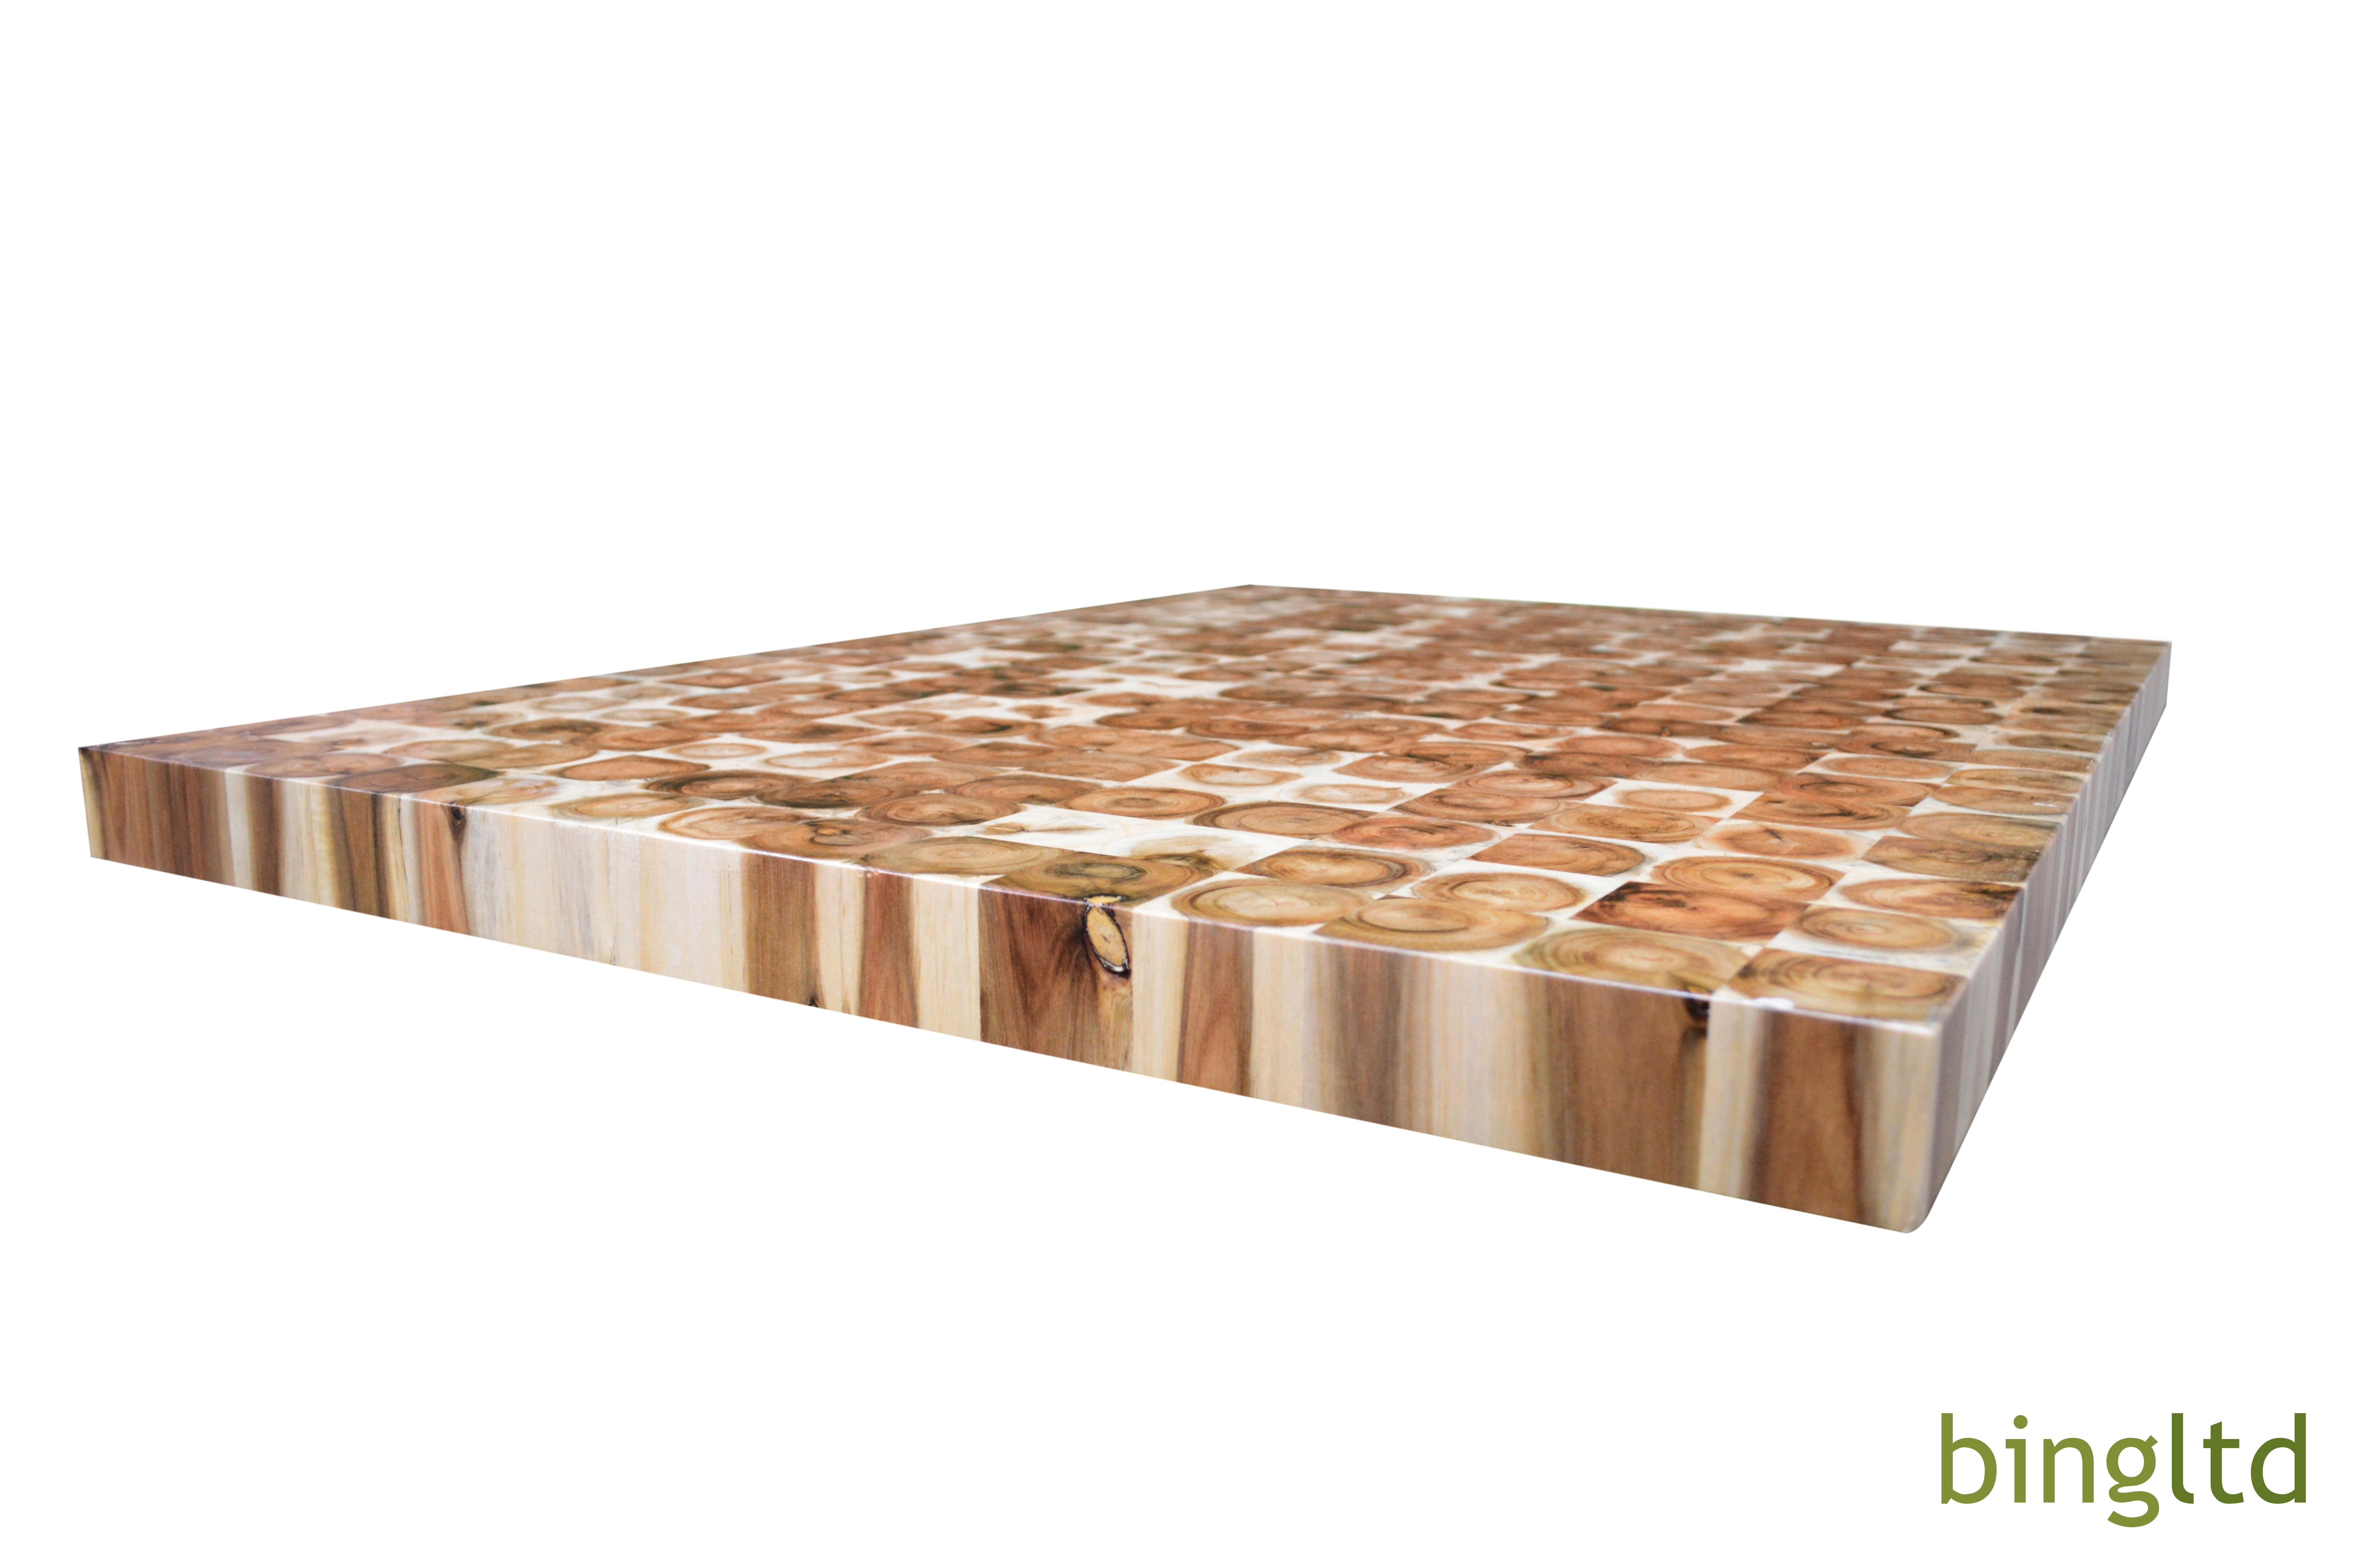 EXTRA LARGE Cutting Board, Rectangle End Grain Butcher Block